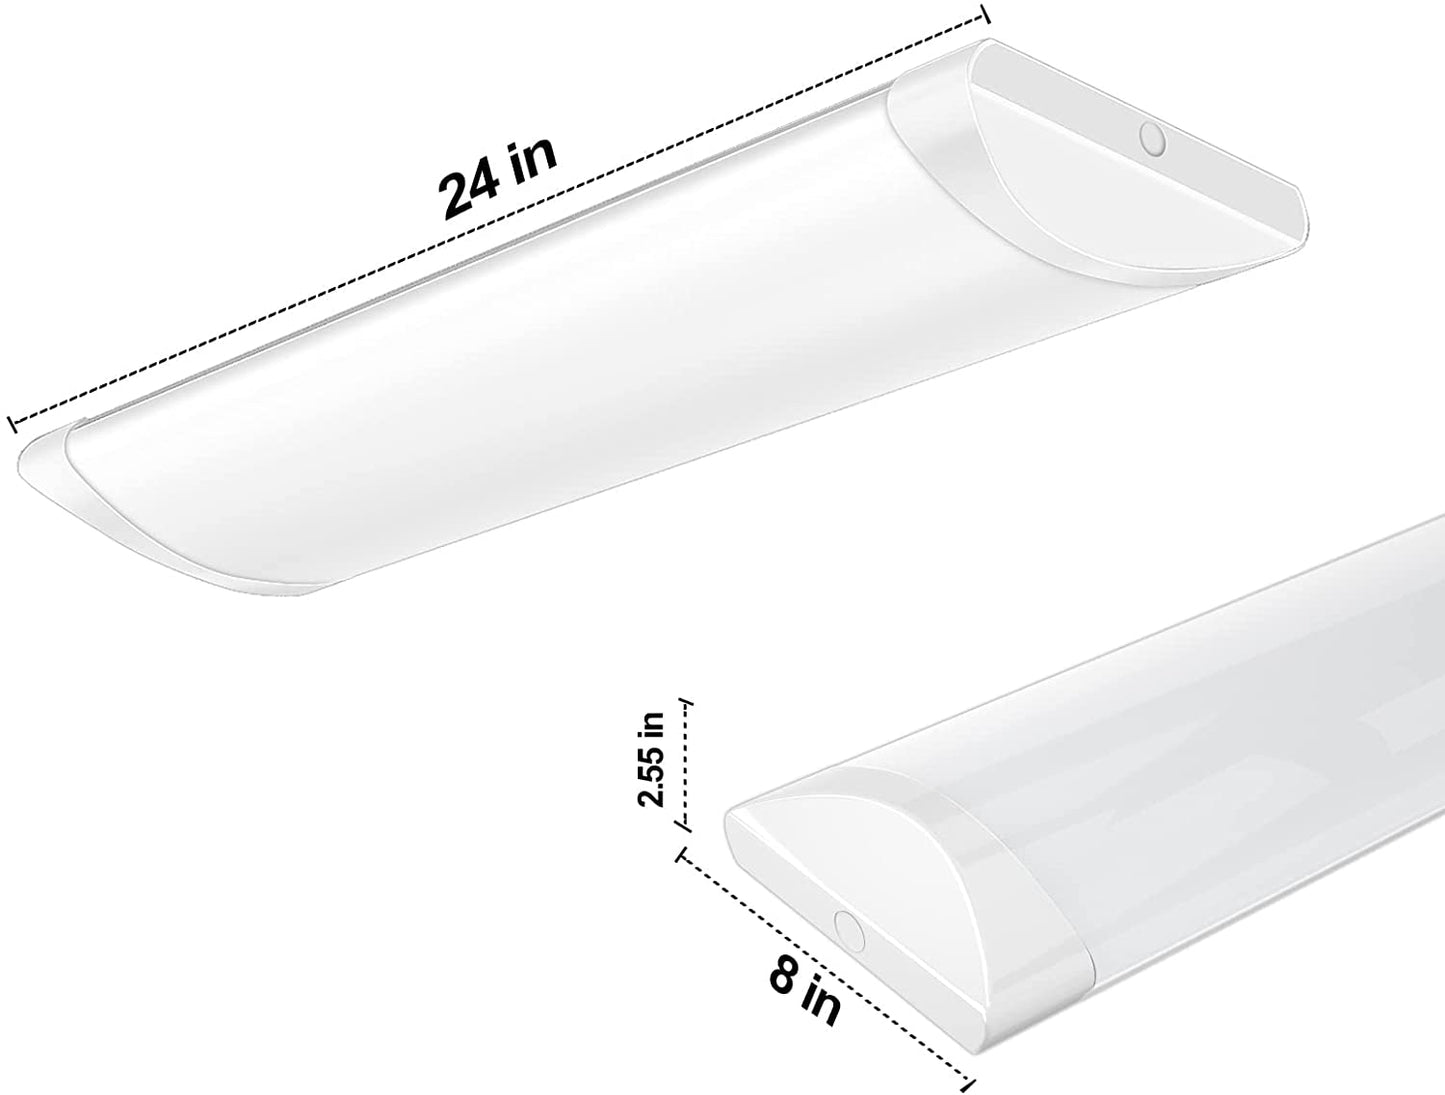 AntLux 2FT LED Linear Flush Mount Light, 20W/2400LM, 4000K Neutral White, 2 Foot Kitchen LED Ceiling Lighting Fixtures, 24 Inch Low-Profile Wraparound Puff Lights for Laundry Closet Garage, 2 Pack